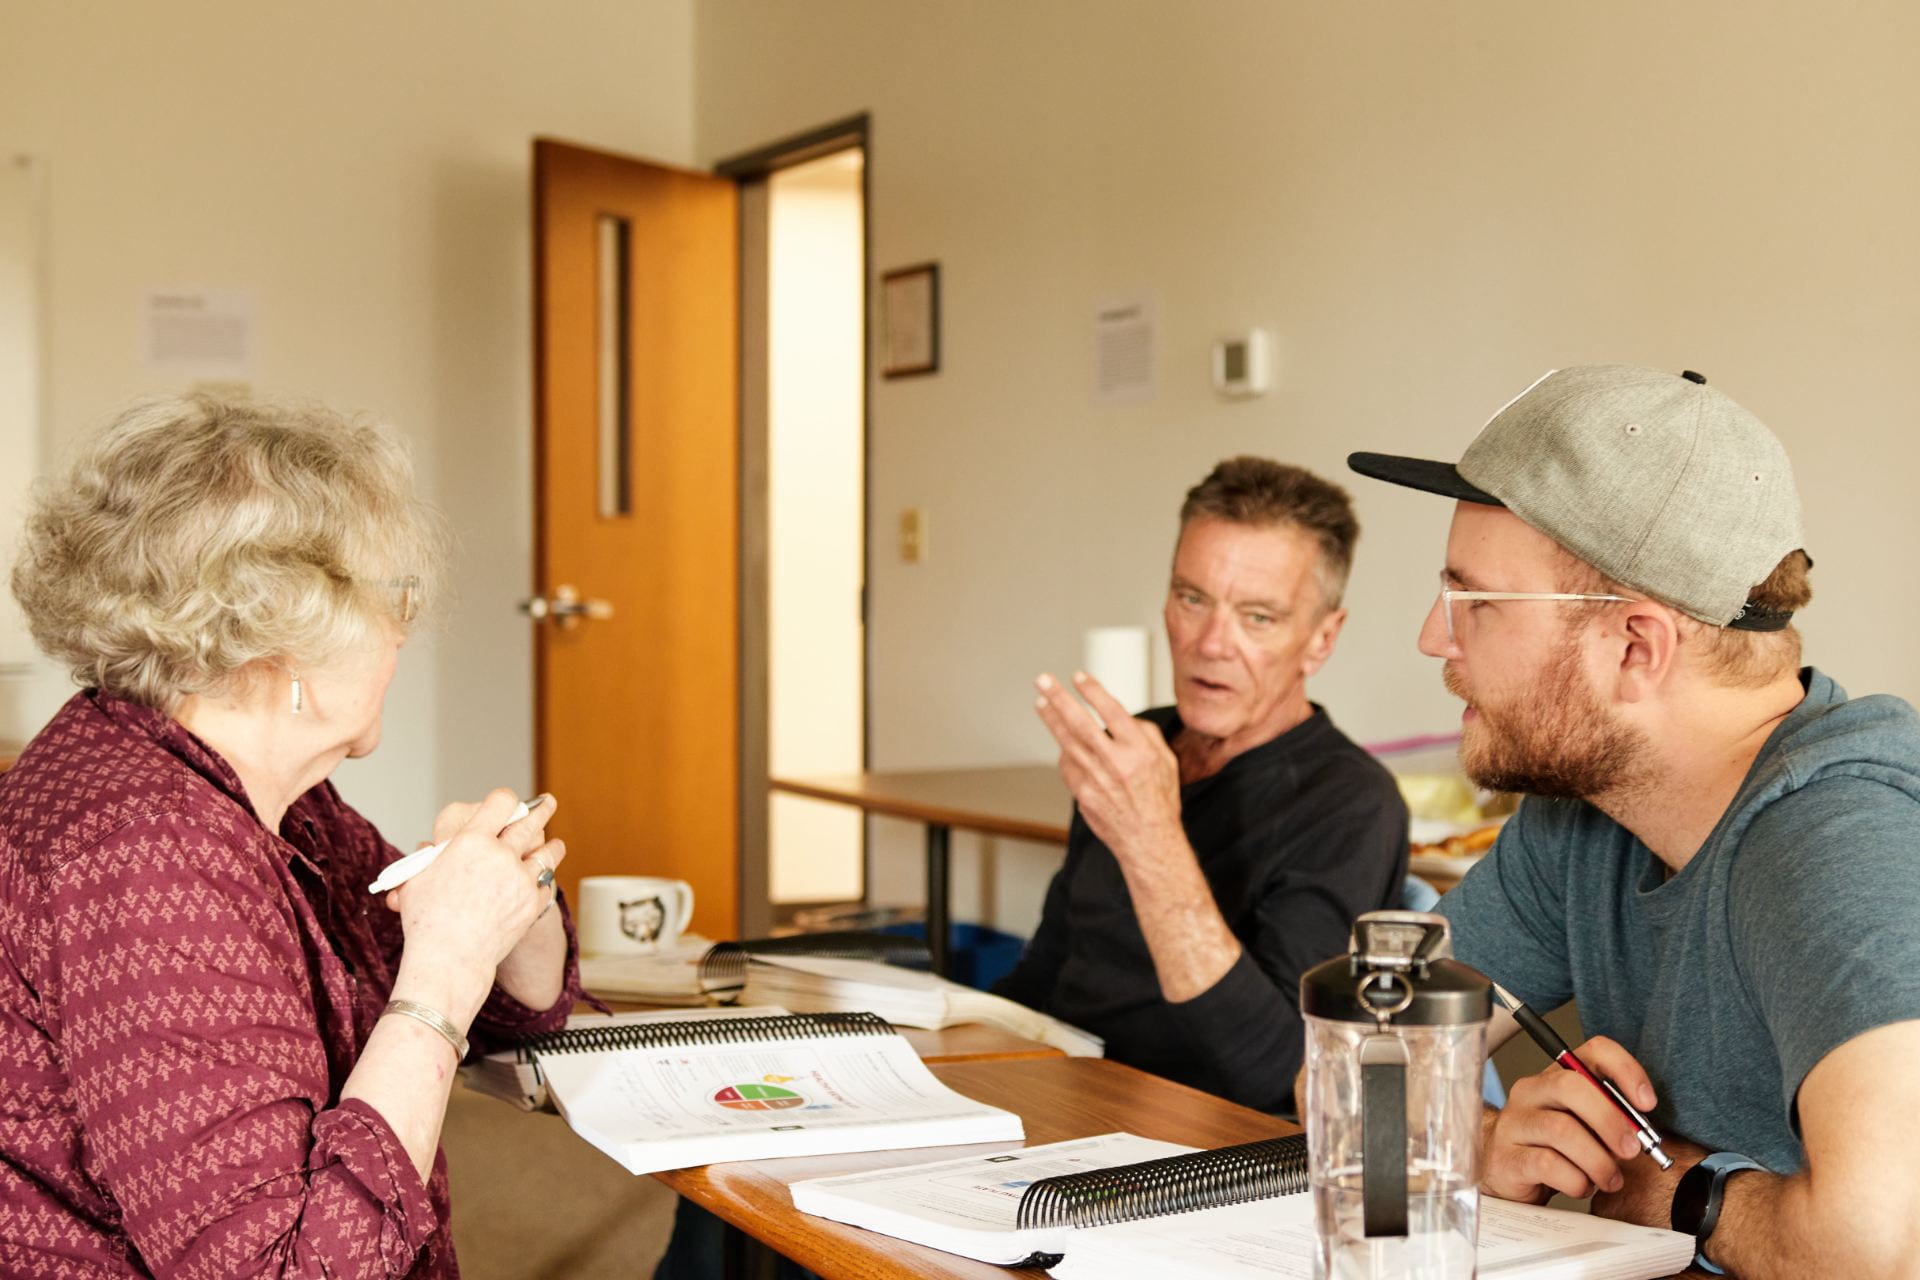 Three students sit in a well-lit classroom, discussing during a group activity. On the left is one student, a woman with curly grey hair, seated across from are two men, one older in a black shirt, speaking with his hand by his face, and another with glasses and a cap, listening.